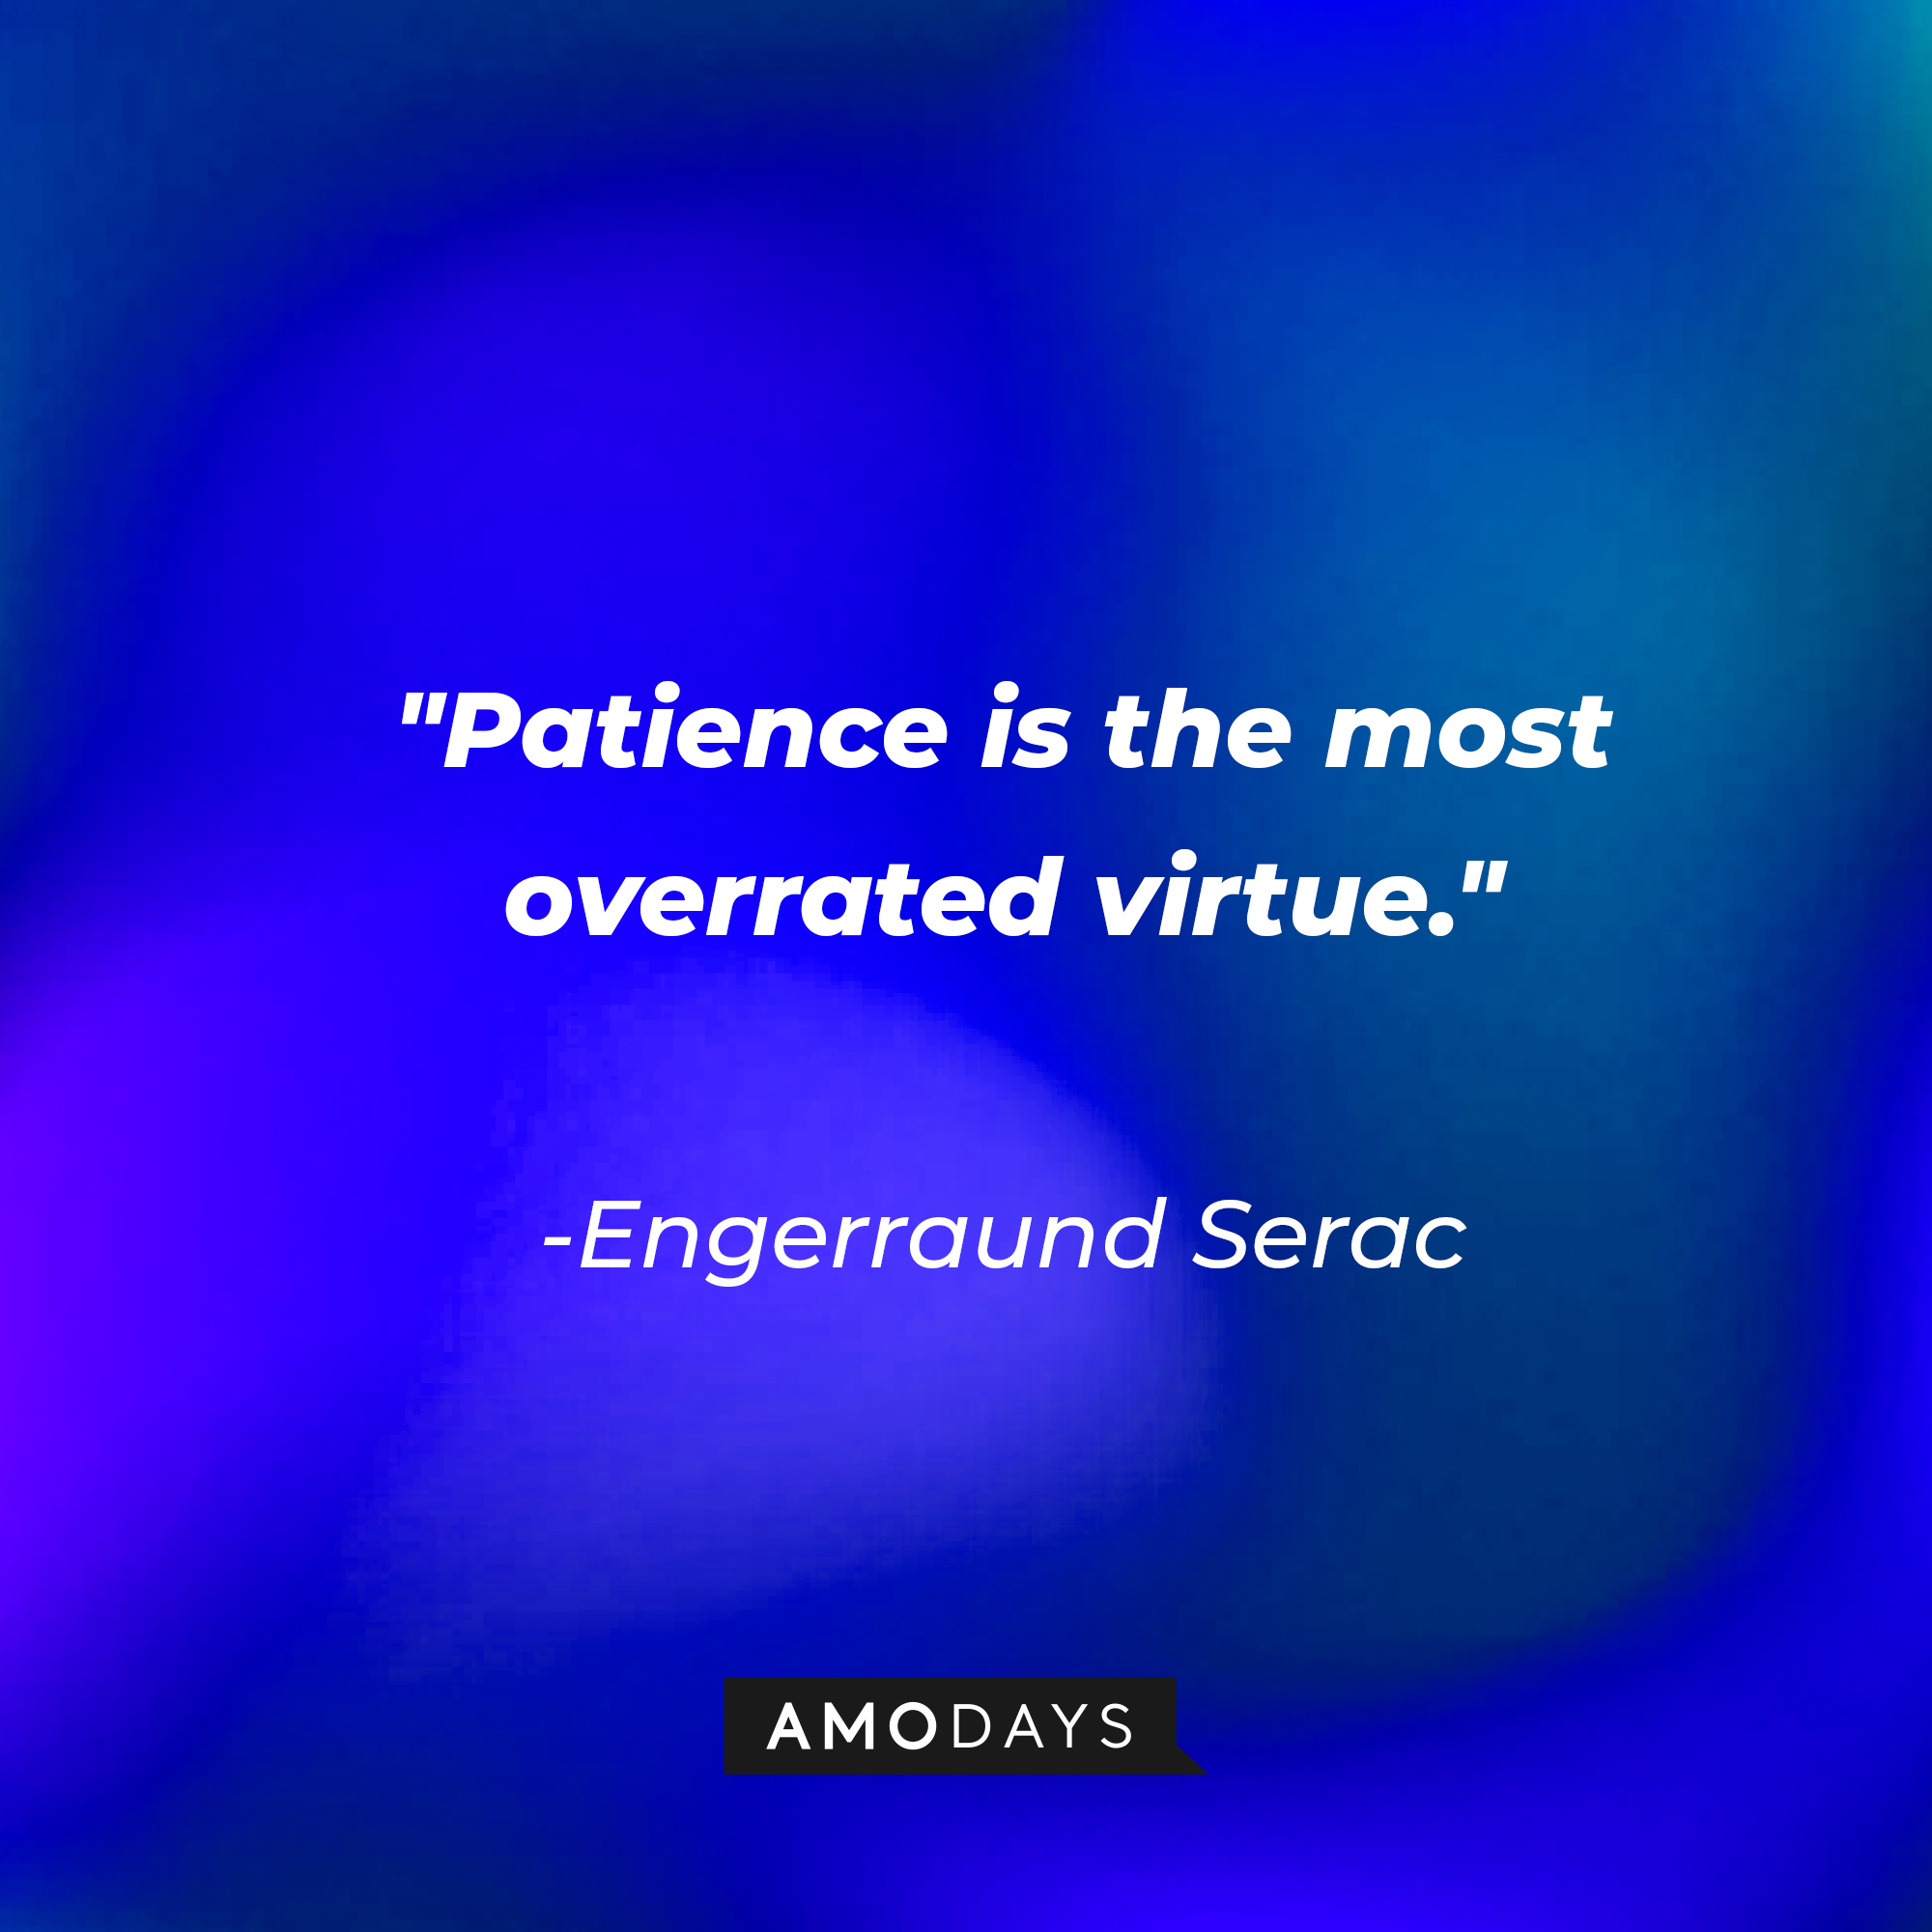 Engerraund Serac's quote: "Patience is the most overrated virtue." | Source: AmoDays